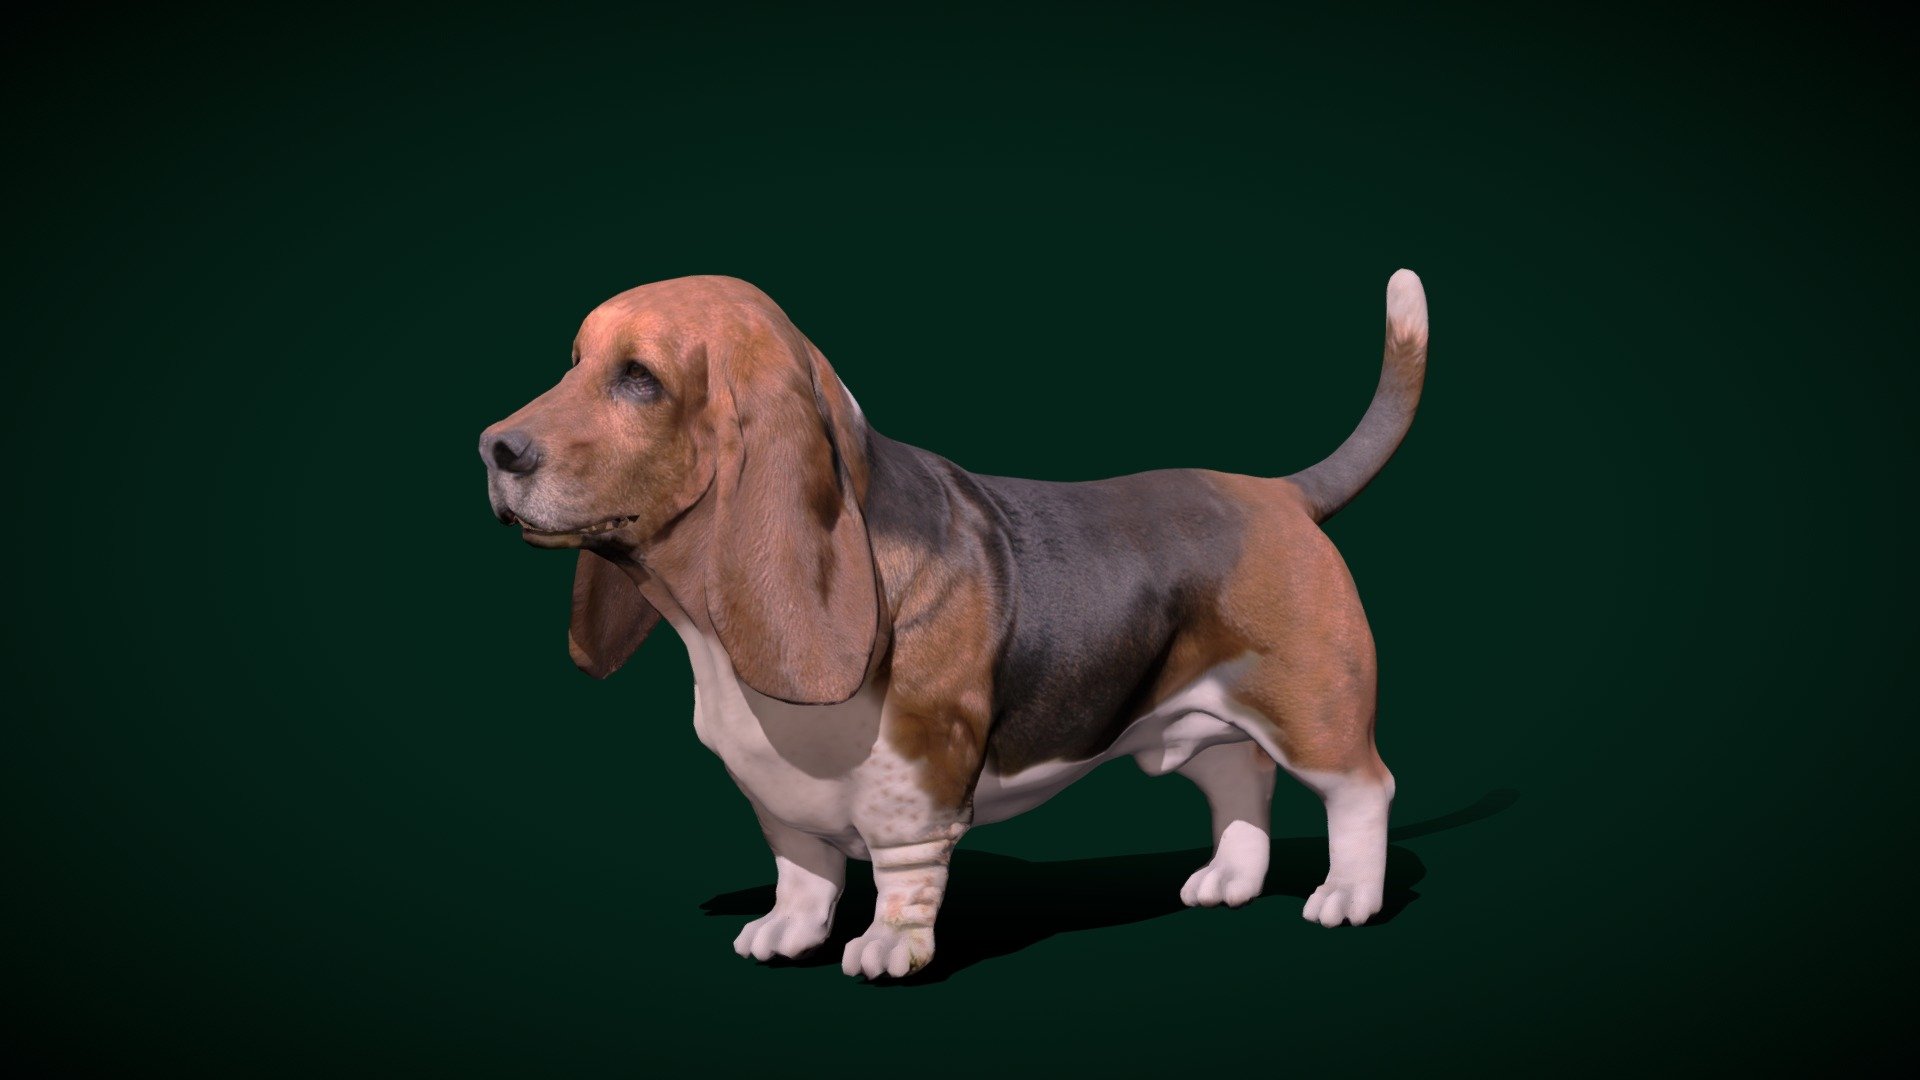 Basset Hound Dog Breed (scent hound ) short-legged breed,France

Canis lupus familiaris Animal Mammal( Hunting Hare Dog) Pet,Cute

1 Draw Calls

Midpoly

Game Ready (Asset)

Subdivision Surface Ready

Single- Animations

4K PBR Textures Material

Unreal FBX (Unreal 4,5 Plus)

Unity FBX

Blend File 3.6.5 LTS

USDZ File (AR Ready). Real Scale Dimension (Xcode ,Reality Composer, Keynote Ready)

Textures Files

GLB File (Unreal 5.1 Plus Native Support)

Gltf File ( Spark AR, Lens Studio(SnapChat) , Effector(Tiktok) , Spline, Play Canvas,Omiverse ) Compatible

Triangles -29109

Faces -14869

Edges -29590

Vertices -14755

Diffuse, Metallic, Roughness , Normal Map ,Specular Map,AO
The Basset Hound is a short-legged breed of dog in the hound family. The Basset is a scent hound that was originally bred for the purpose of hunting hare. T
 - Basset Hound Dog Breed - Buy Royalty Free 3D model by Nyilonelycompany 3d model